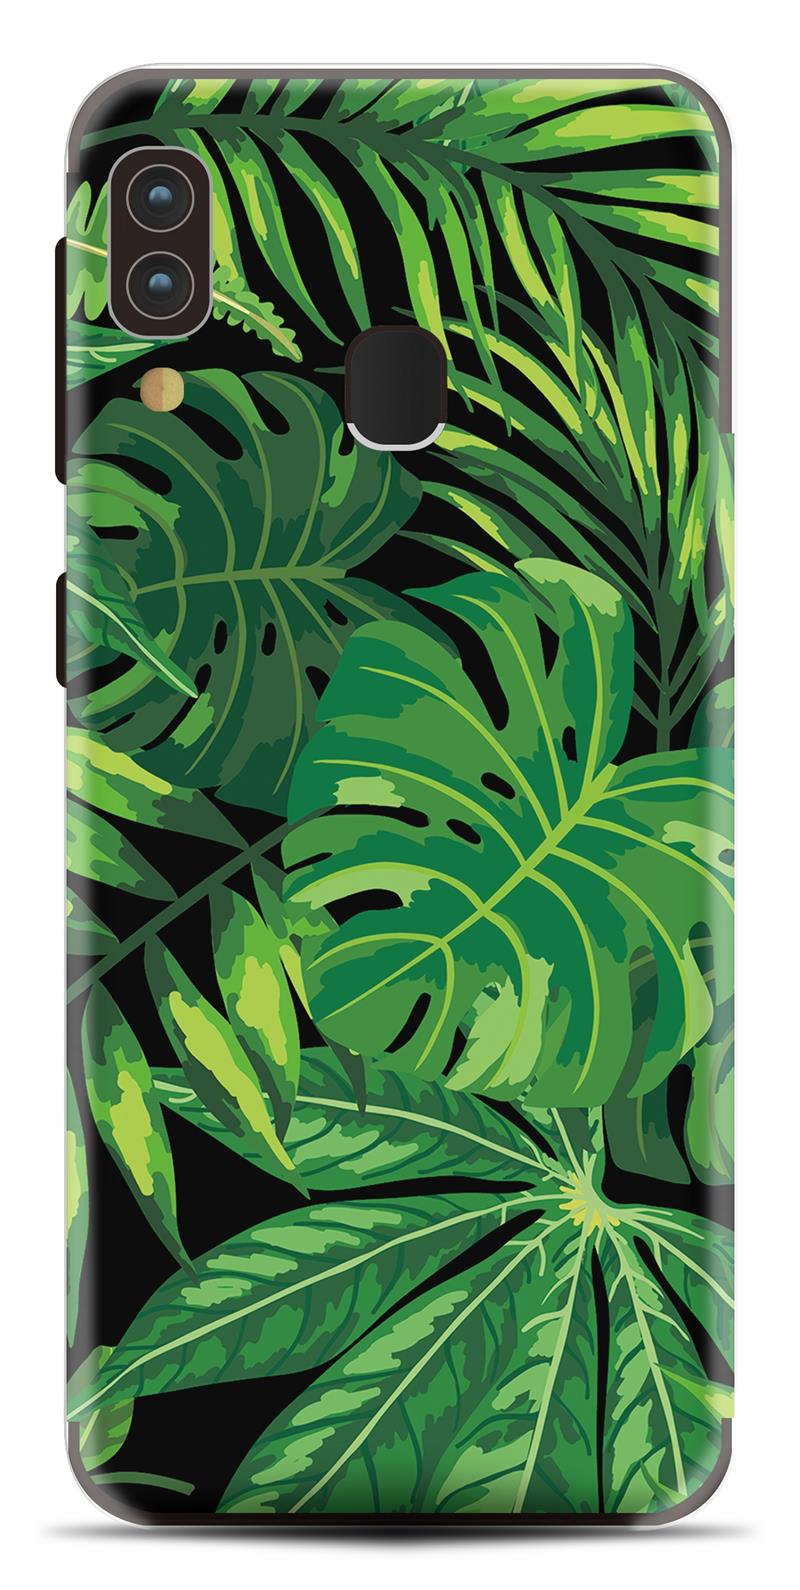 My Style PhoneSkin For Samsung Galaxy A20e Jungle Fever